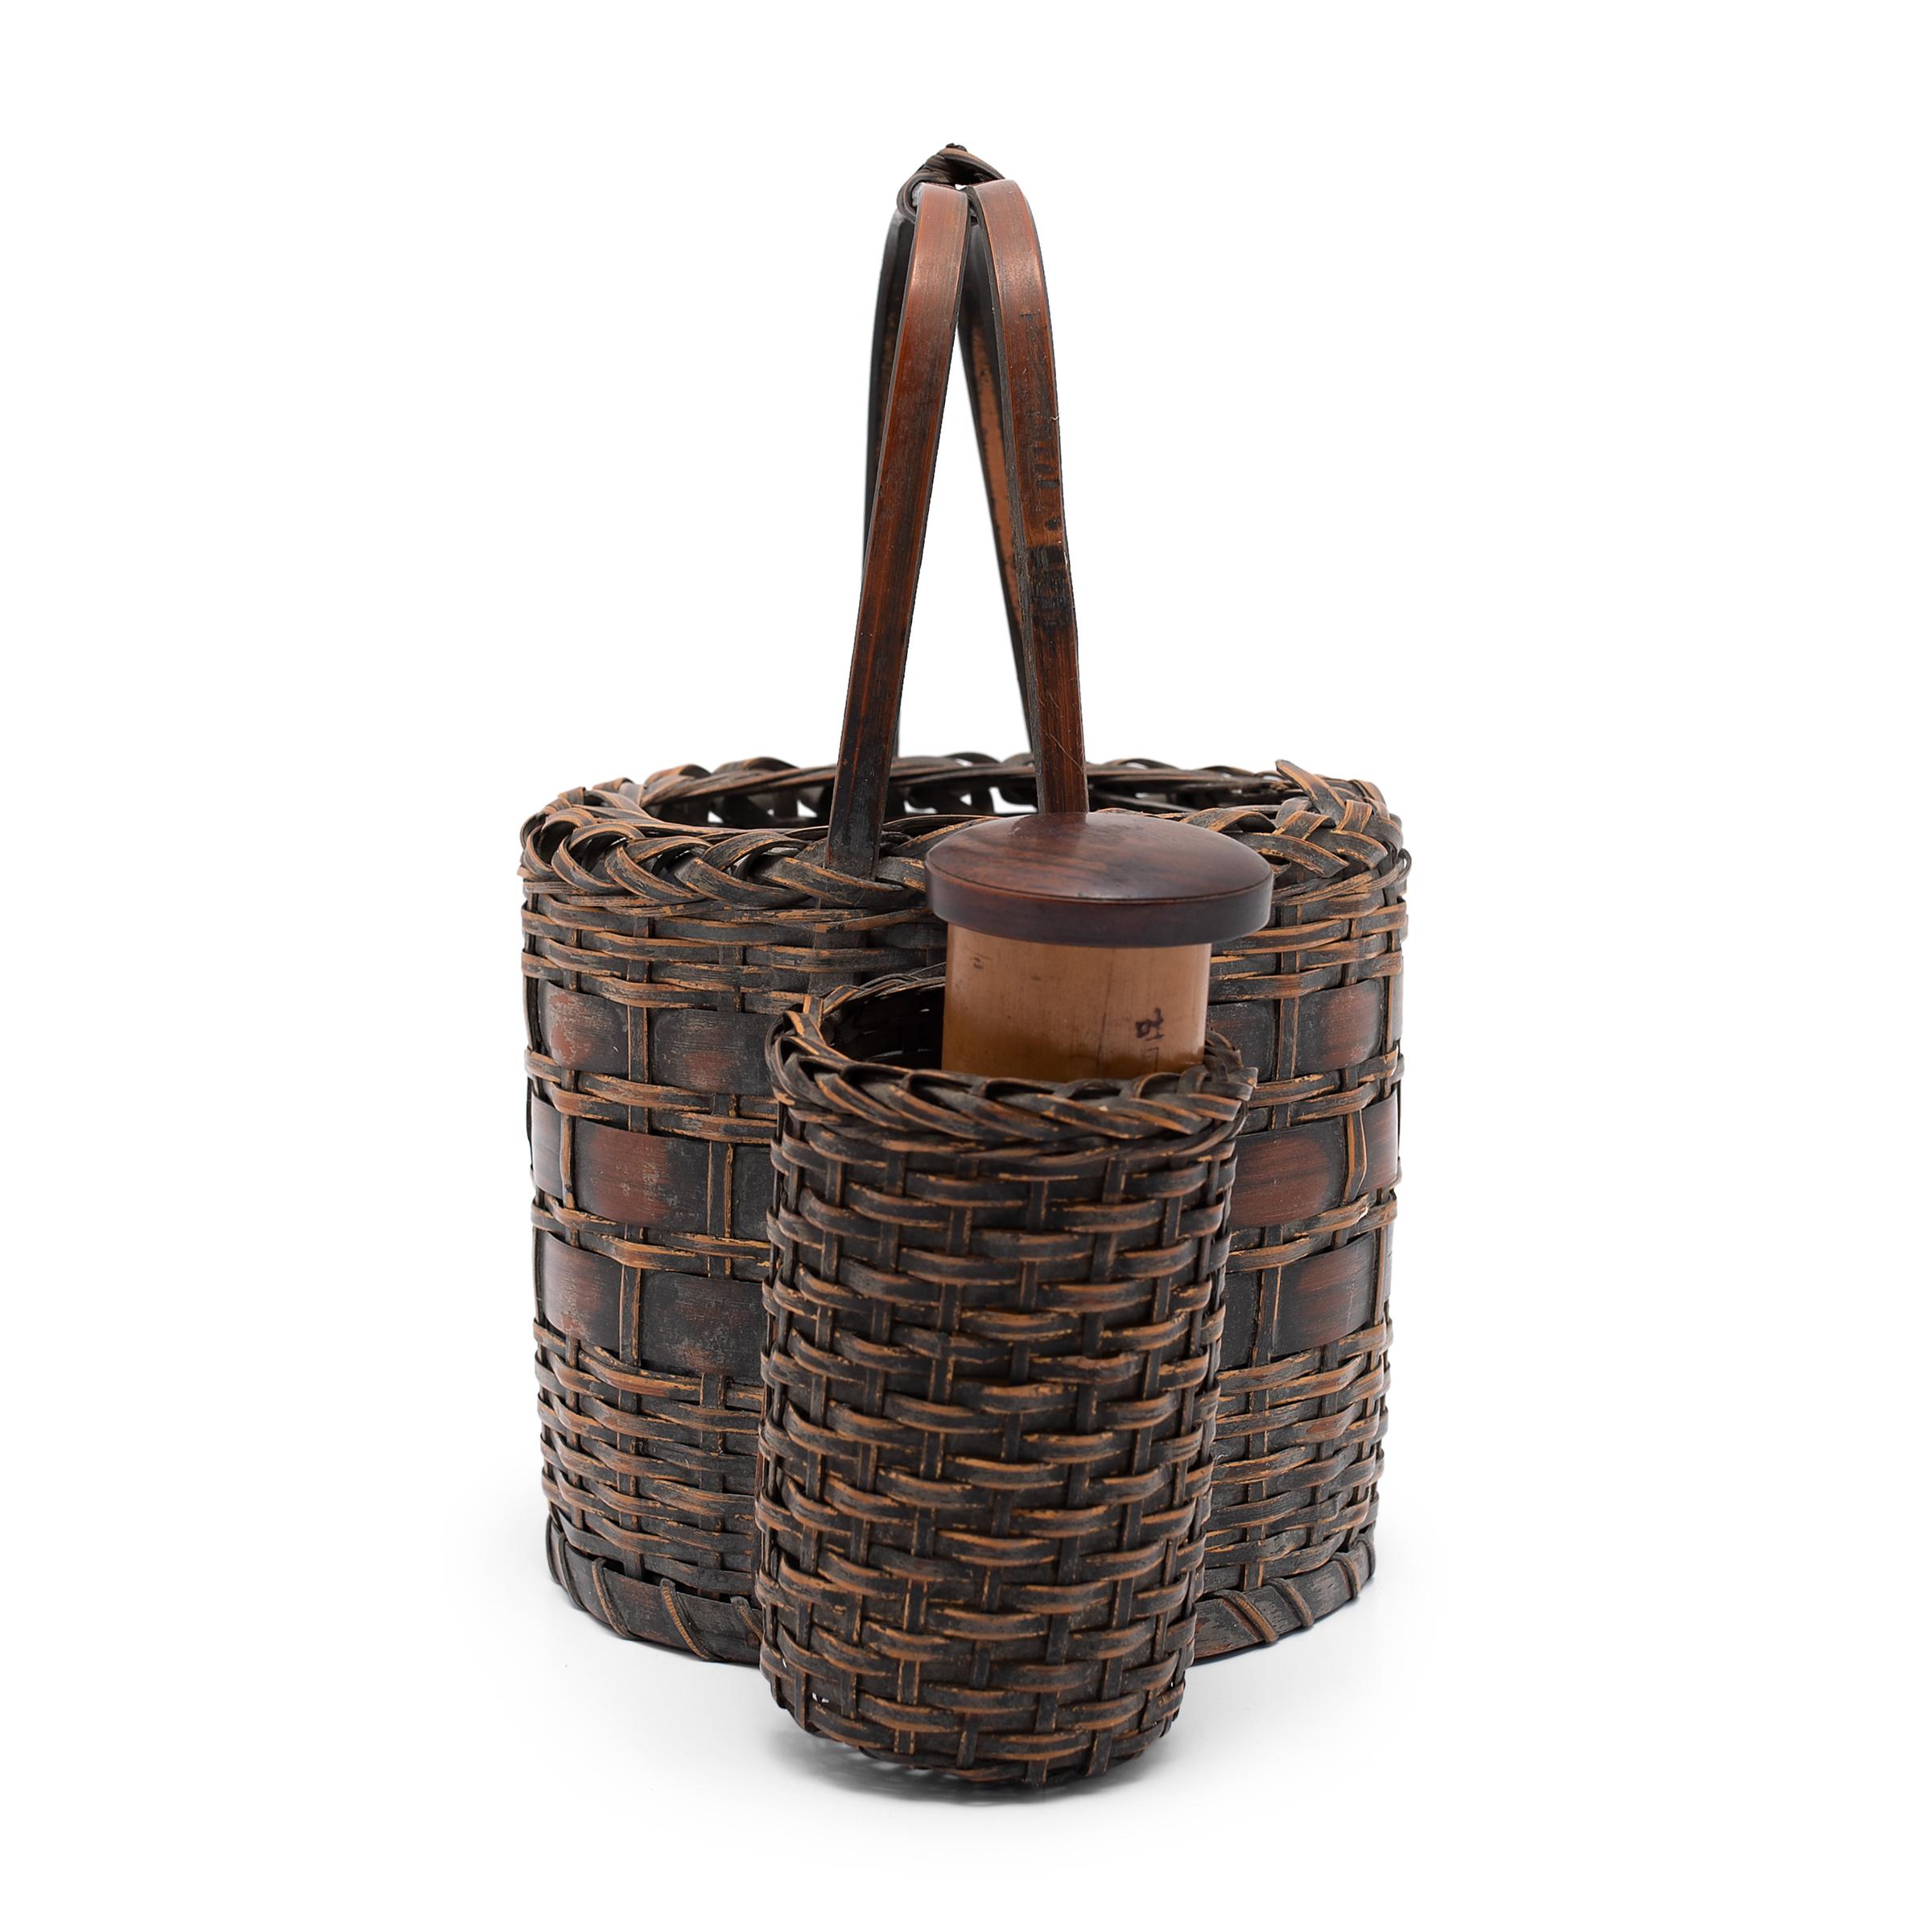 This woven basket is actually a Japanese tabako-bon, or 'tobacco tray,' used as a portable hibachi for lighting tobacco pipes. Believed to have evolved from the traditional accessories of Japanese incense ceremony, tabako-bons first came into use in